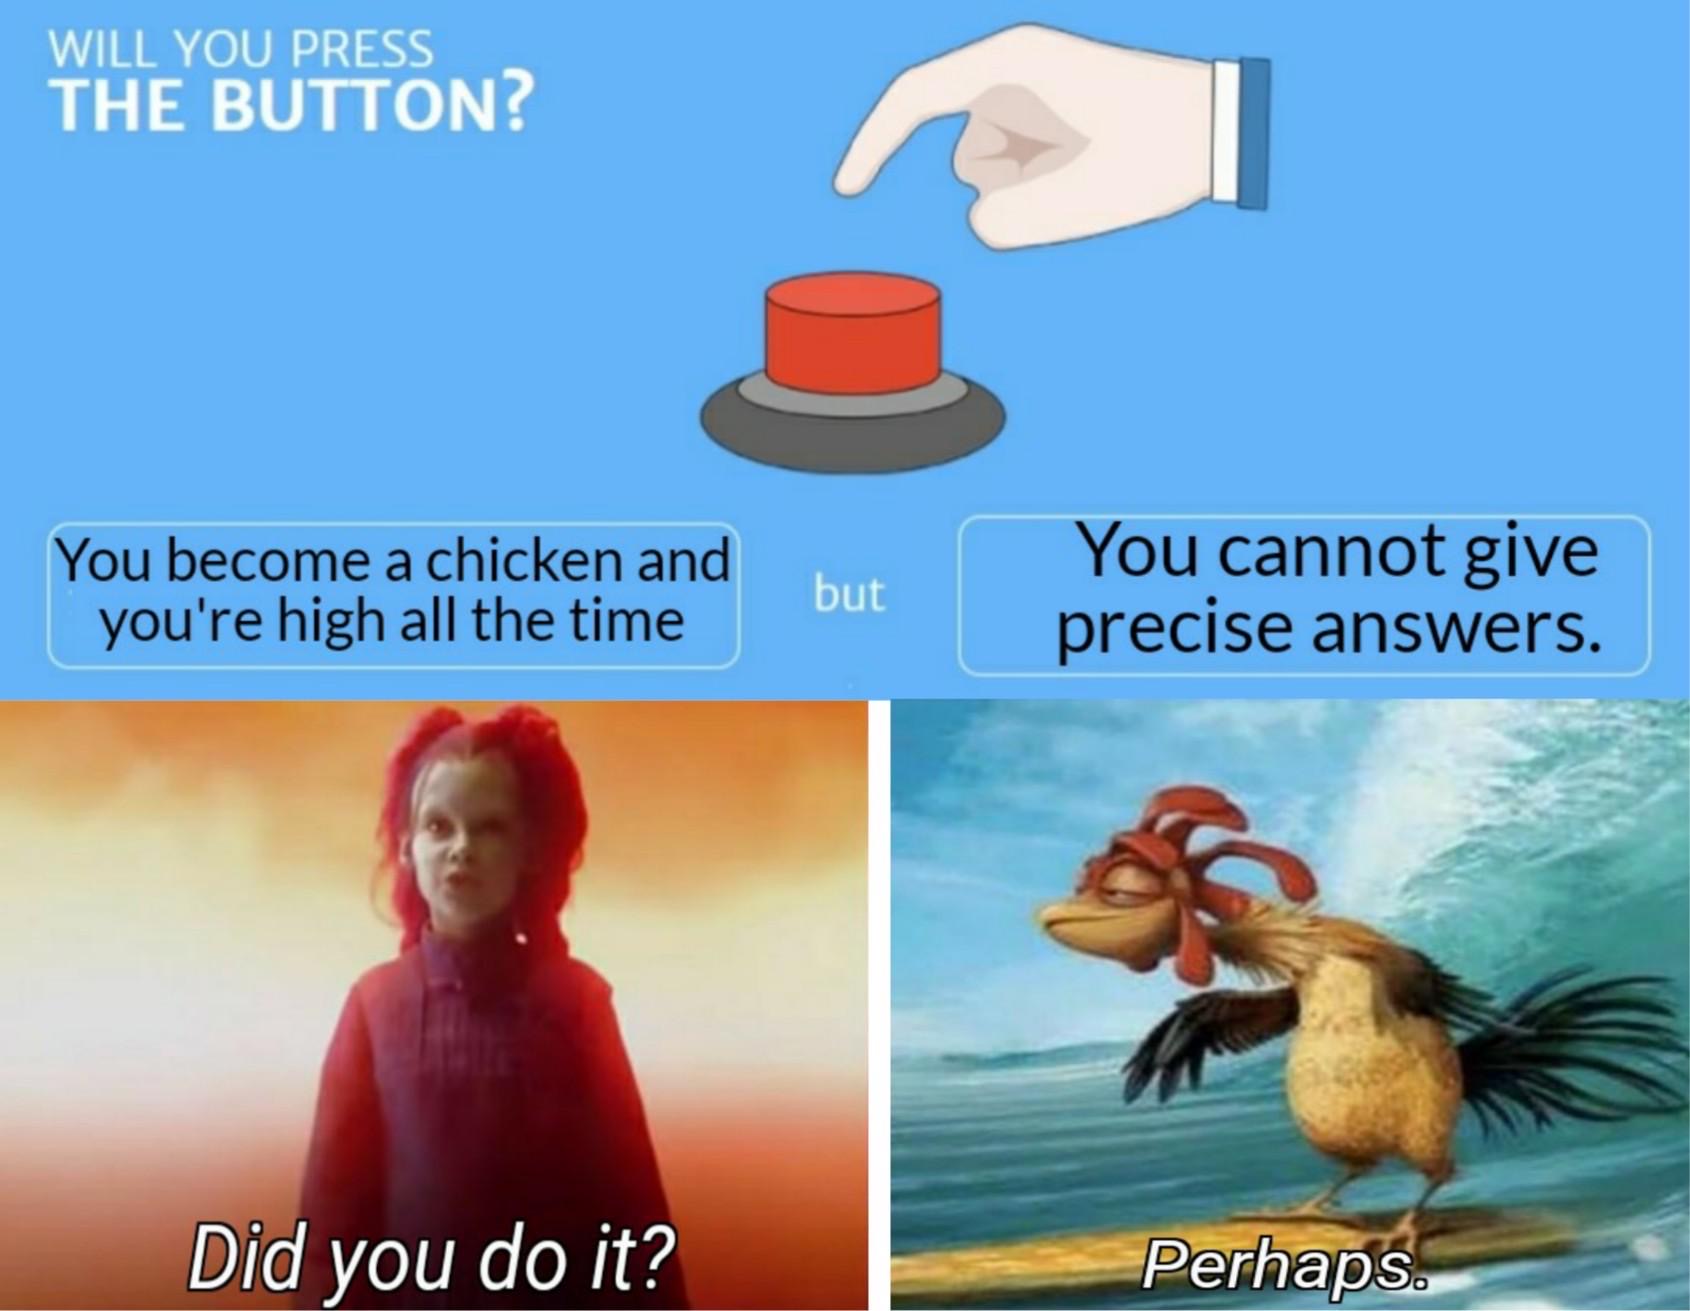 funny memes - you make 1 million per month but can t use emojis - Will You Press The Button? You become a chicken and you're high all the time but You cannot give precise answers. Did you do it? Perhaps.